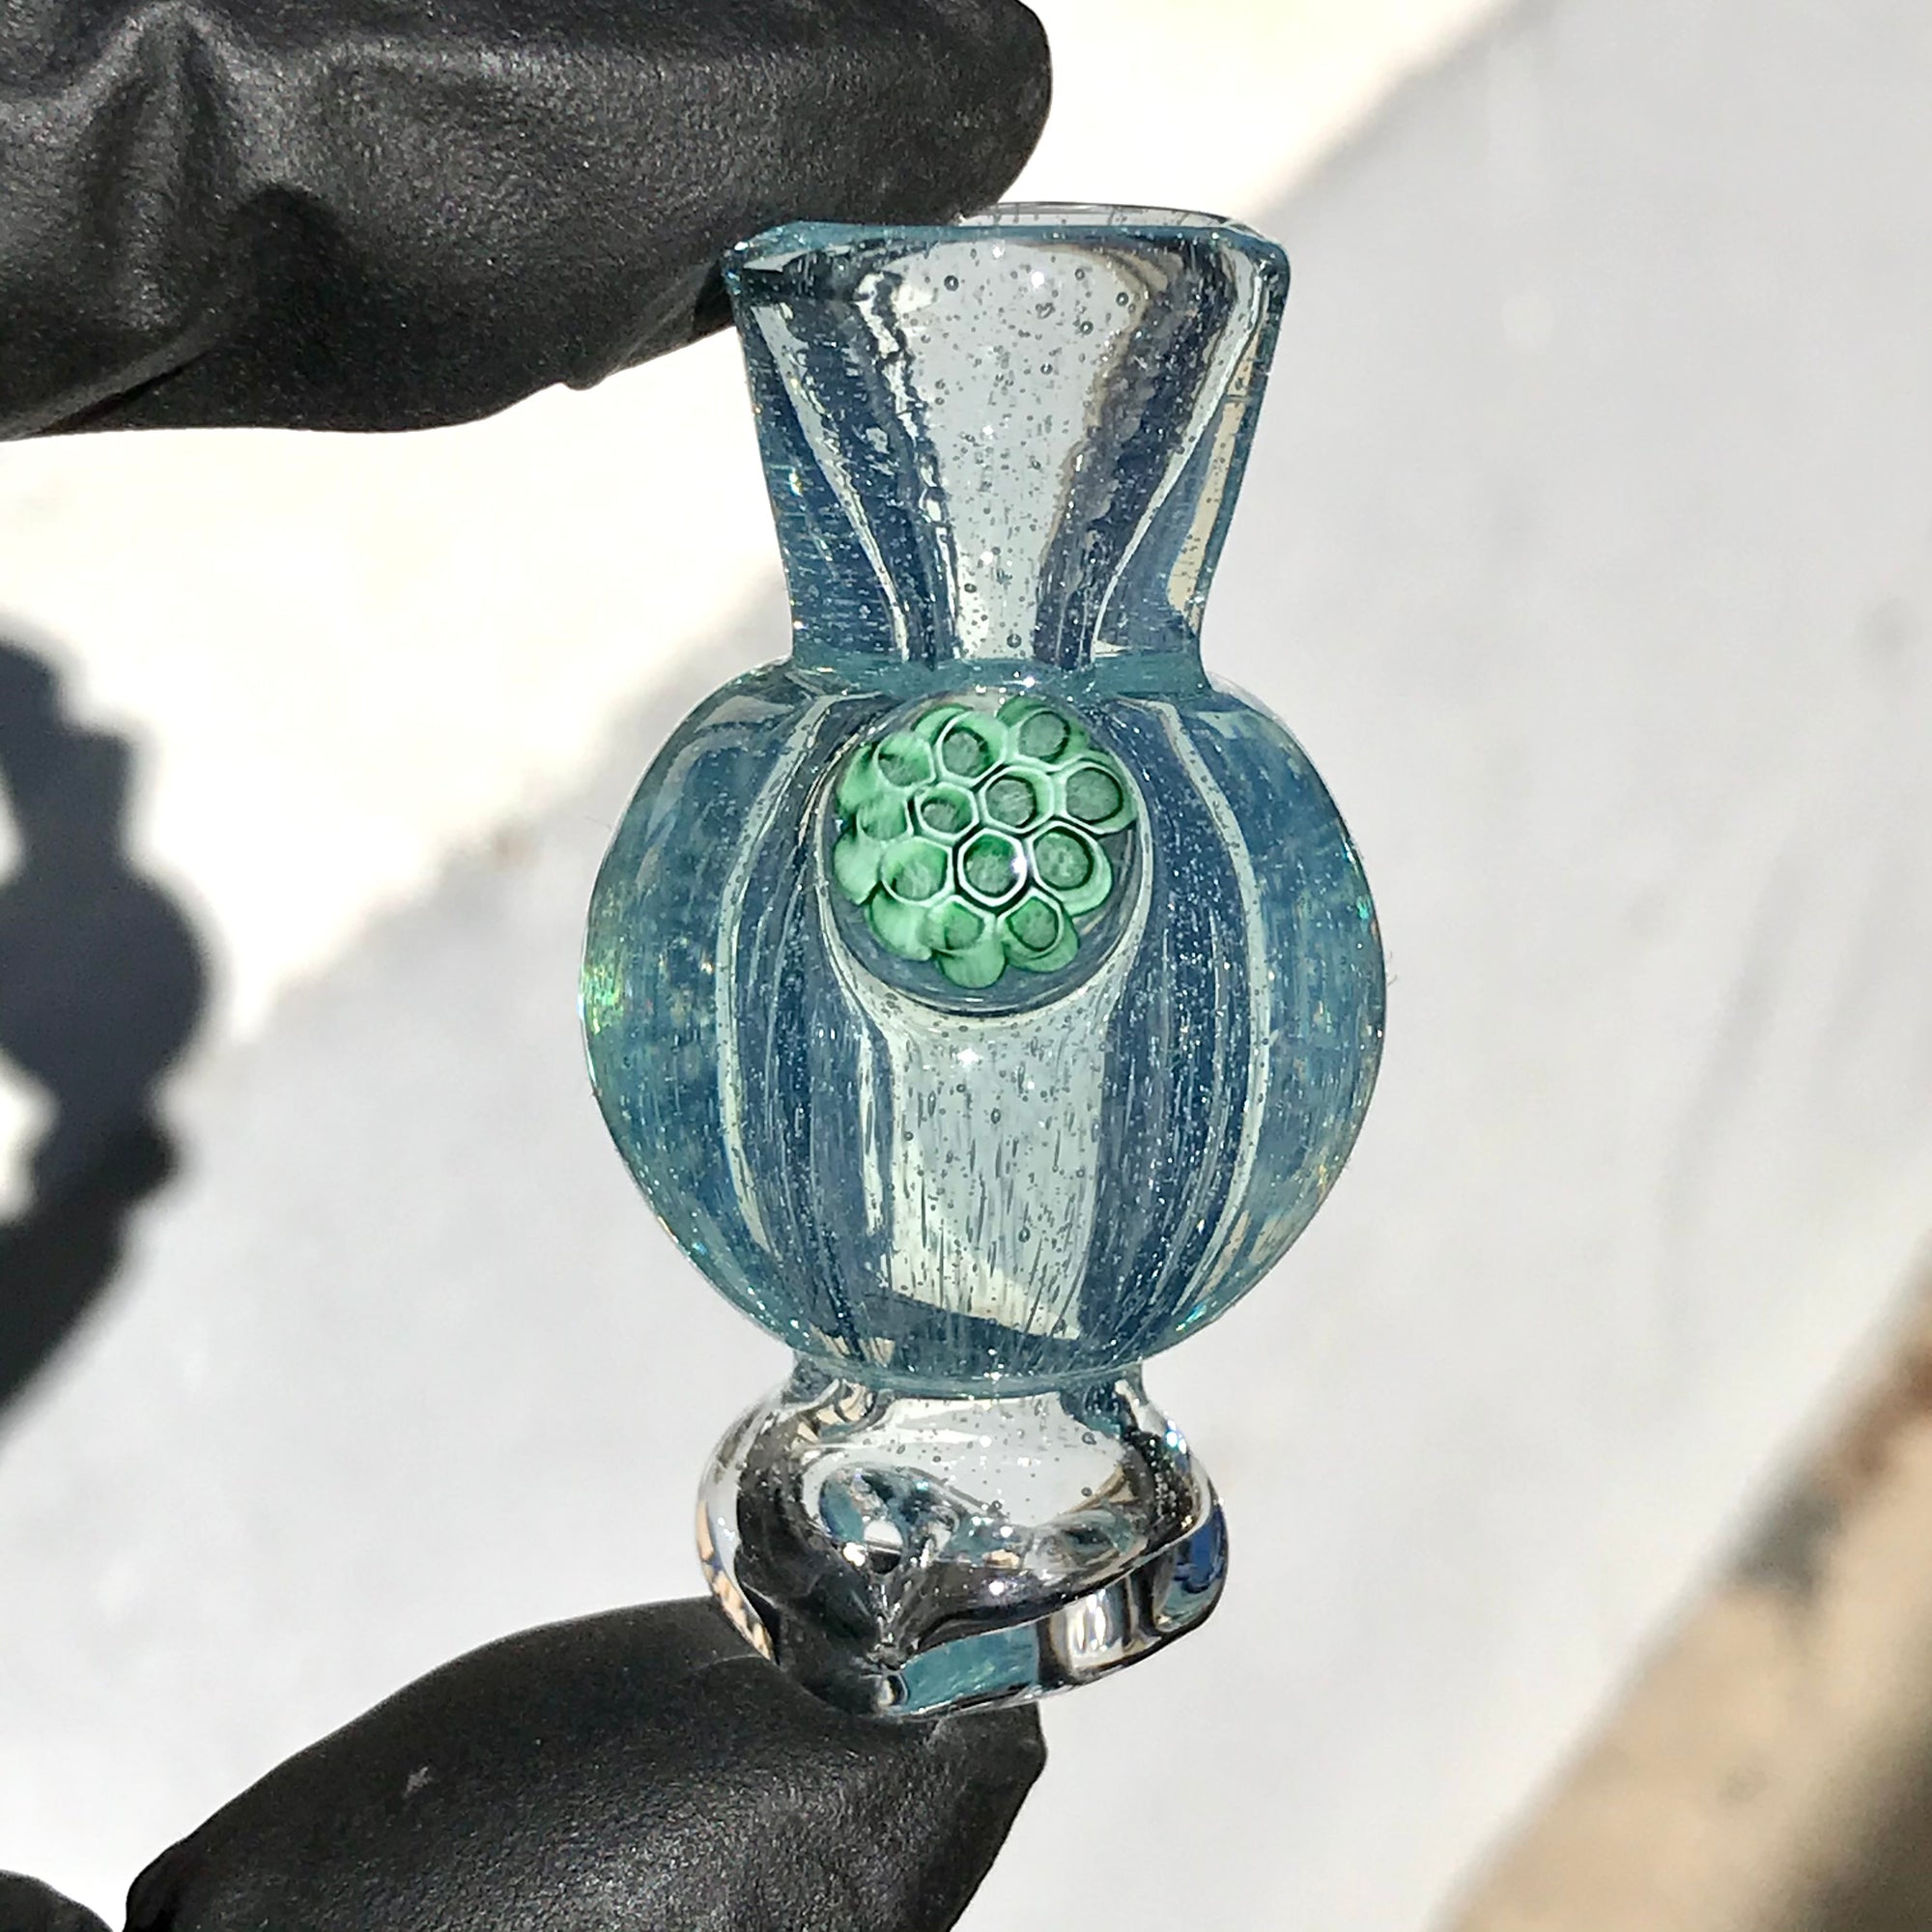 Hoyer Glass Spinner Cap with Milli Image and Matching Milli Terp Pearl (Zen) show variant 